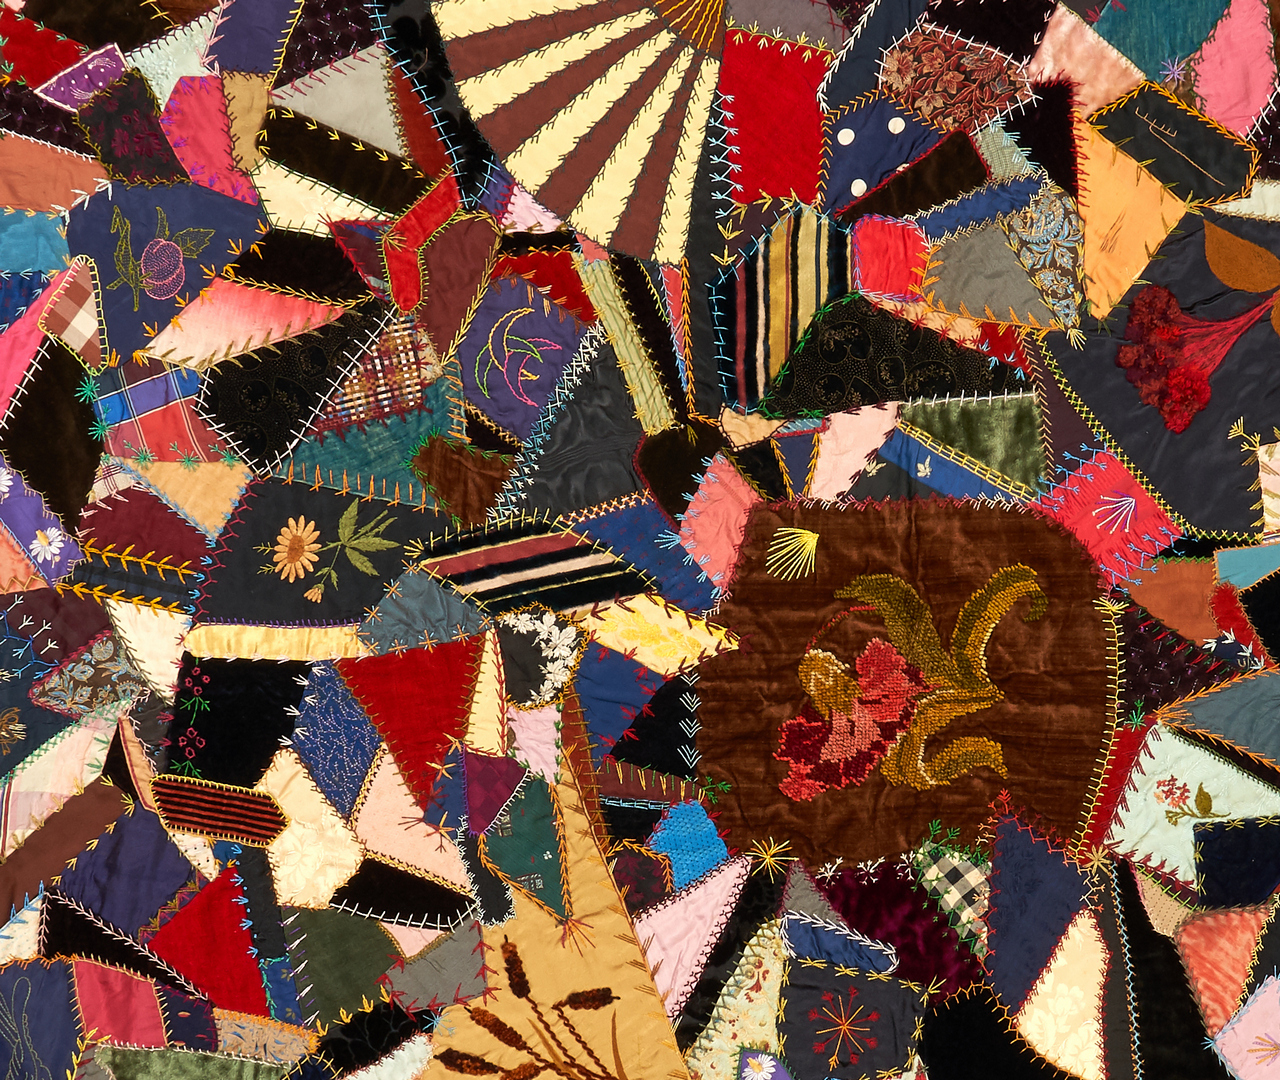 Lot 412: Southern Crazy Quilt, Virginia History